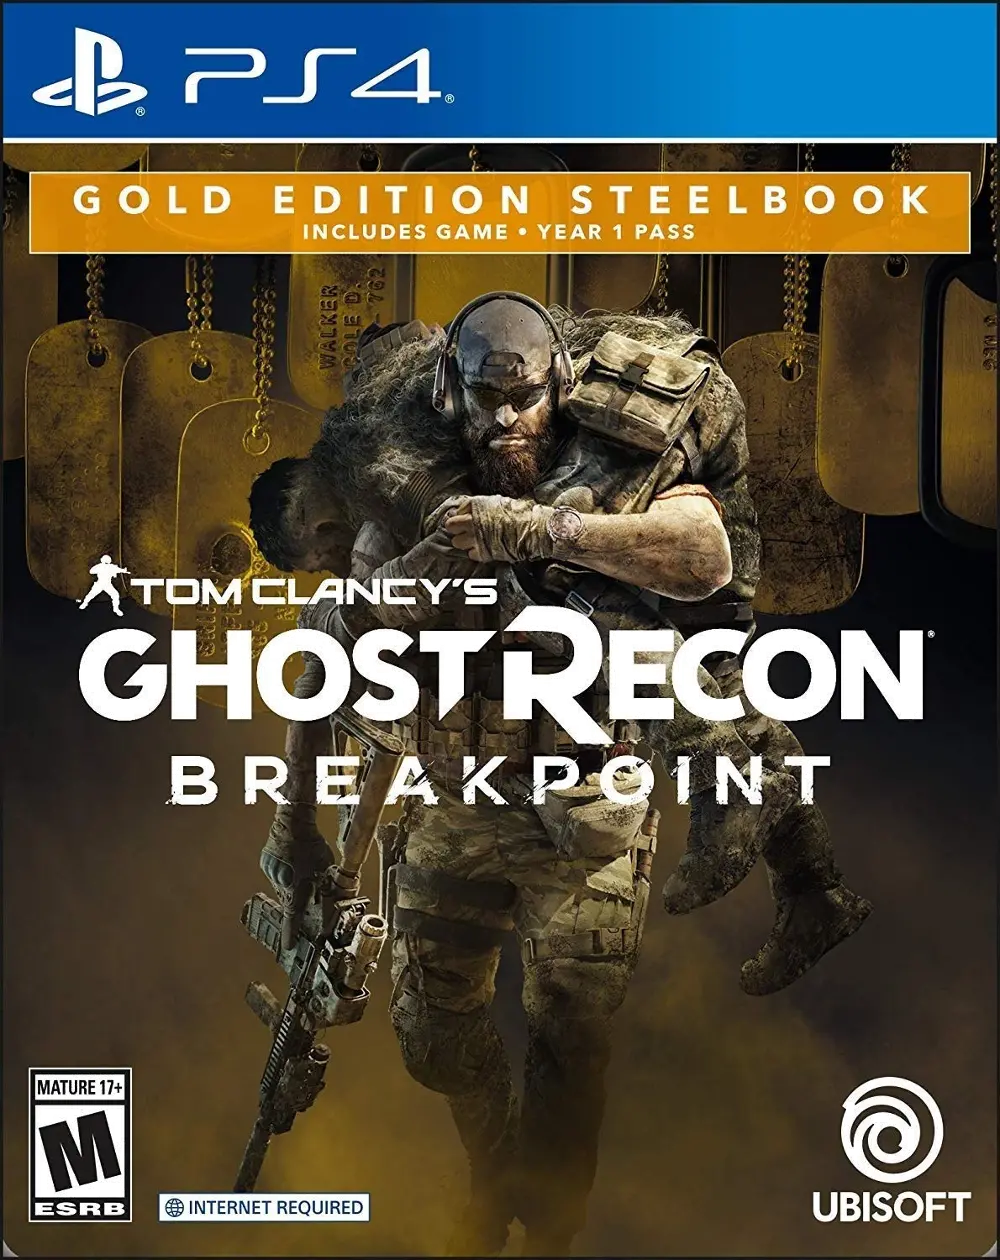 PS4/TOM_GHOST_BRKPNT Tom Clancy's Ghost Recon Breakpoint: Gold Edition - PS4-1